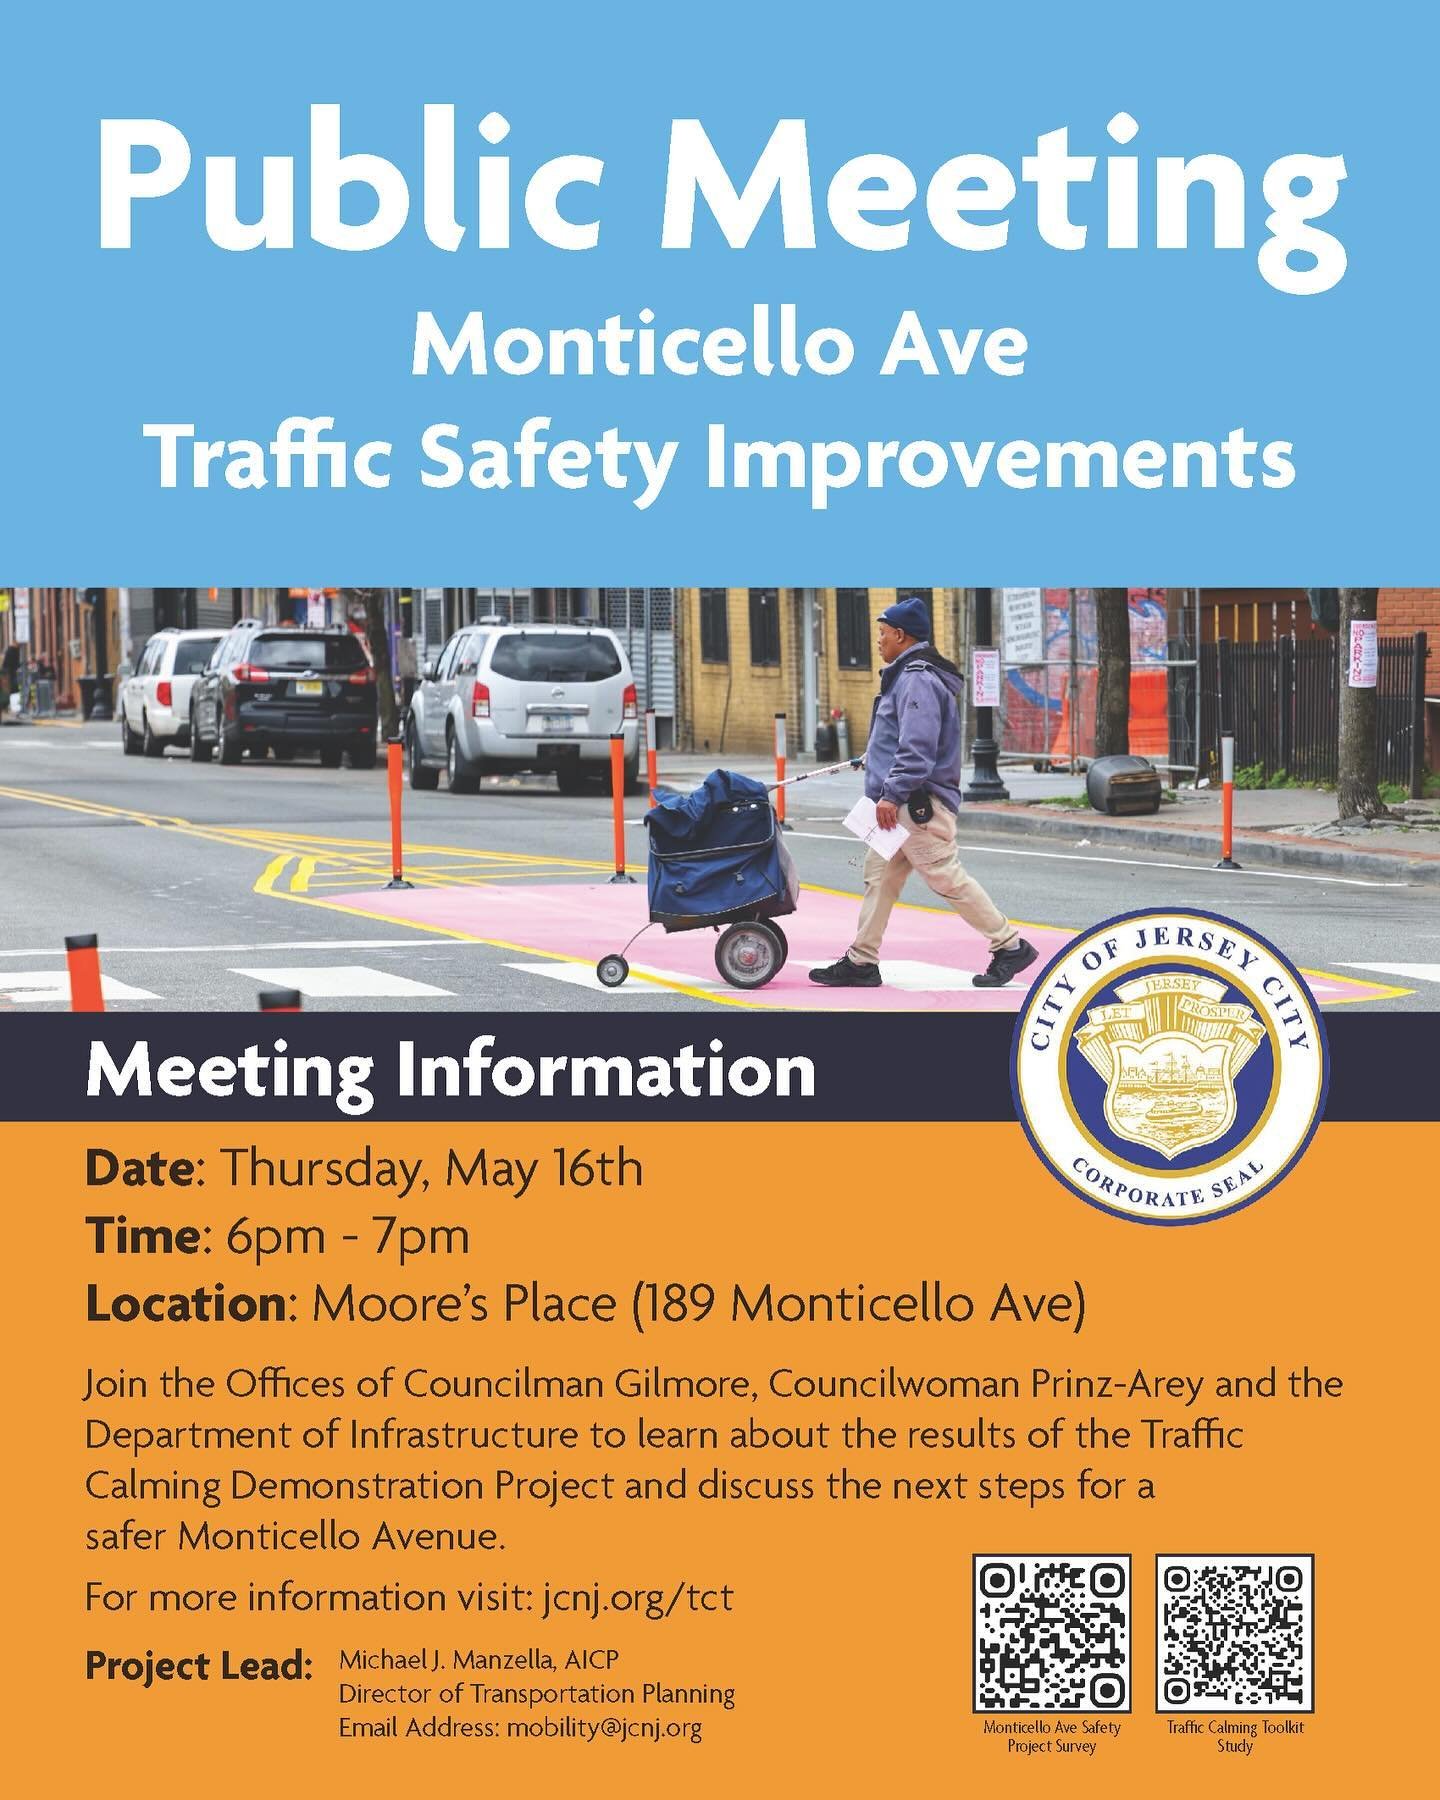 JOIN US AS WE DISCUSS THE RESULTS OF THE SURVEY AND NEXT STEPS FOR MONTICELLO AVE

Thursday, May 16th at Moore&rsquo;s Place.

The community build event held on Saturday, April 6th was successful in bringing area residents together to help install th